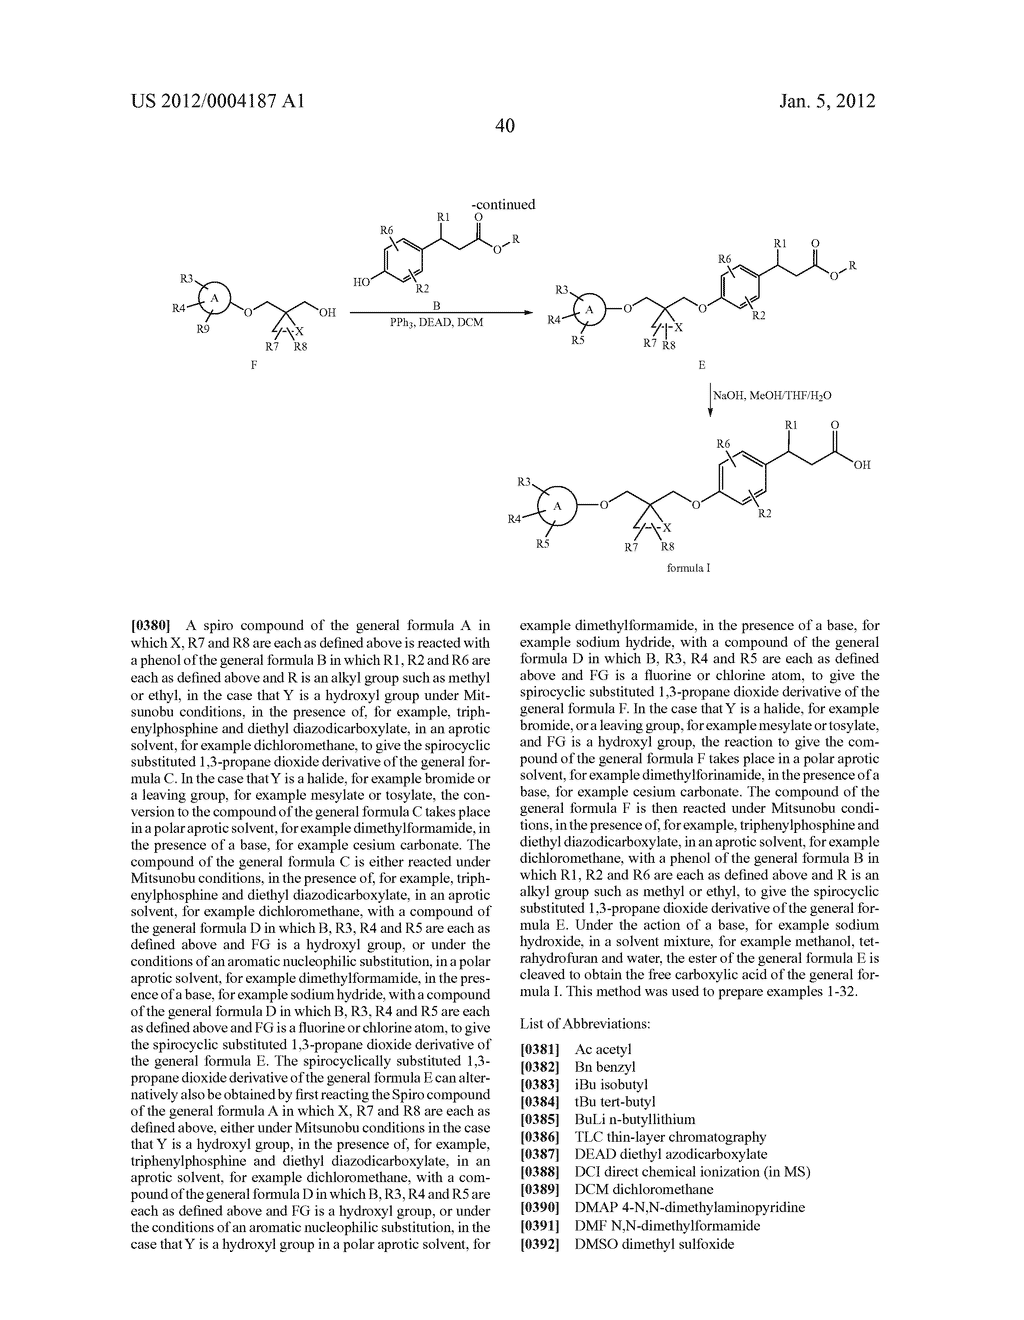 SPIROCYCLICALLY SUBSTITUTED 1,3-PROPANE DIOXIDE DERIVATIVES, PROCESSES FOR     PREPARATION THEREOF AND USE THEREOF AS A MEDICAMENT - diagram, schematic, and image 41